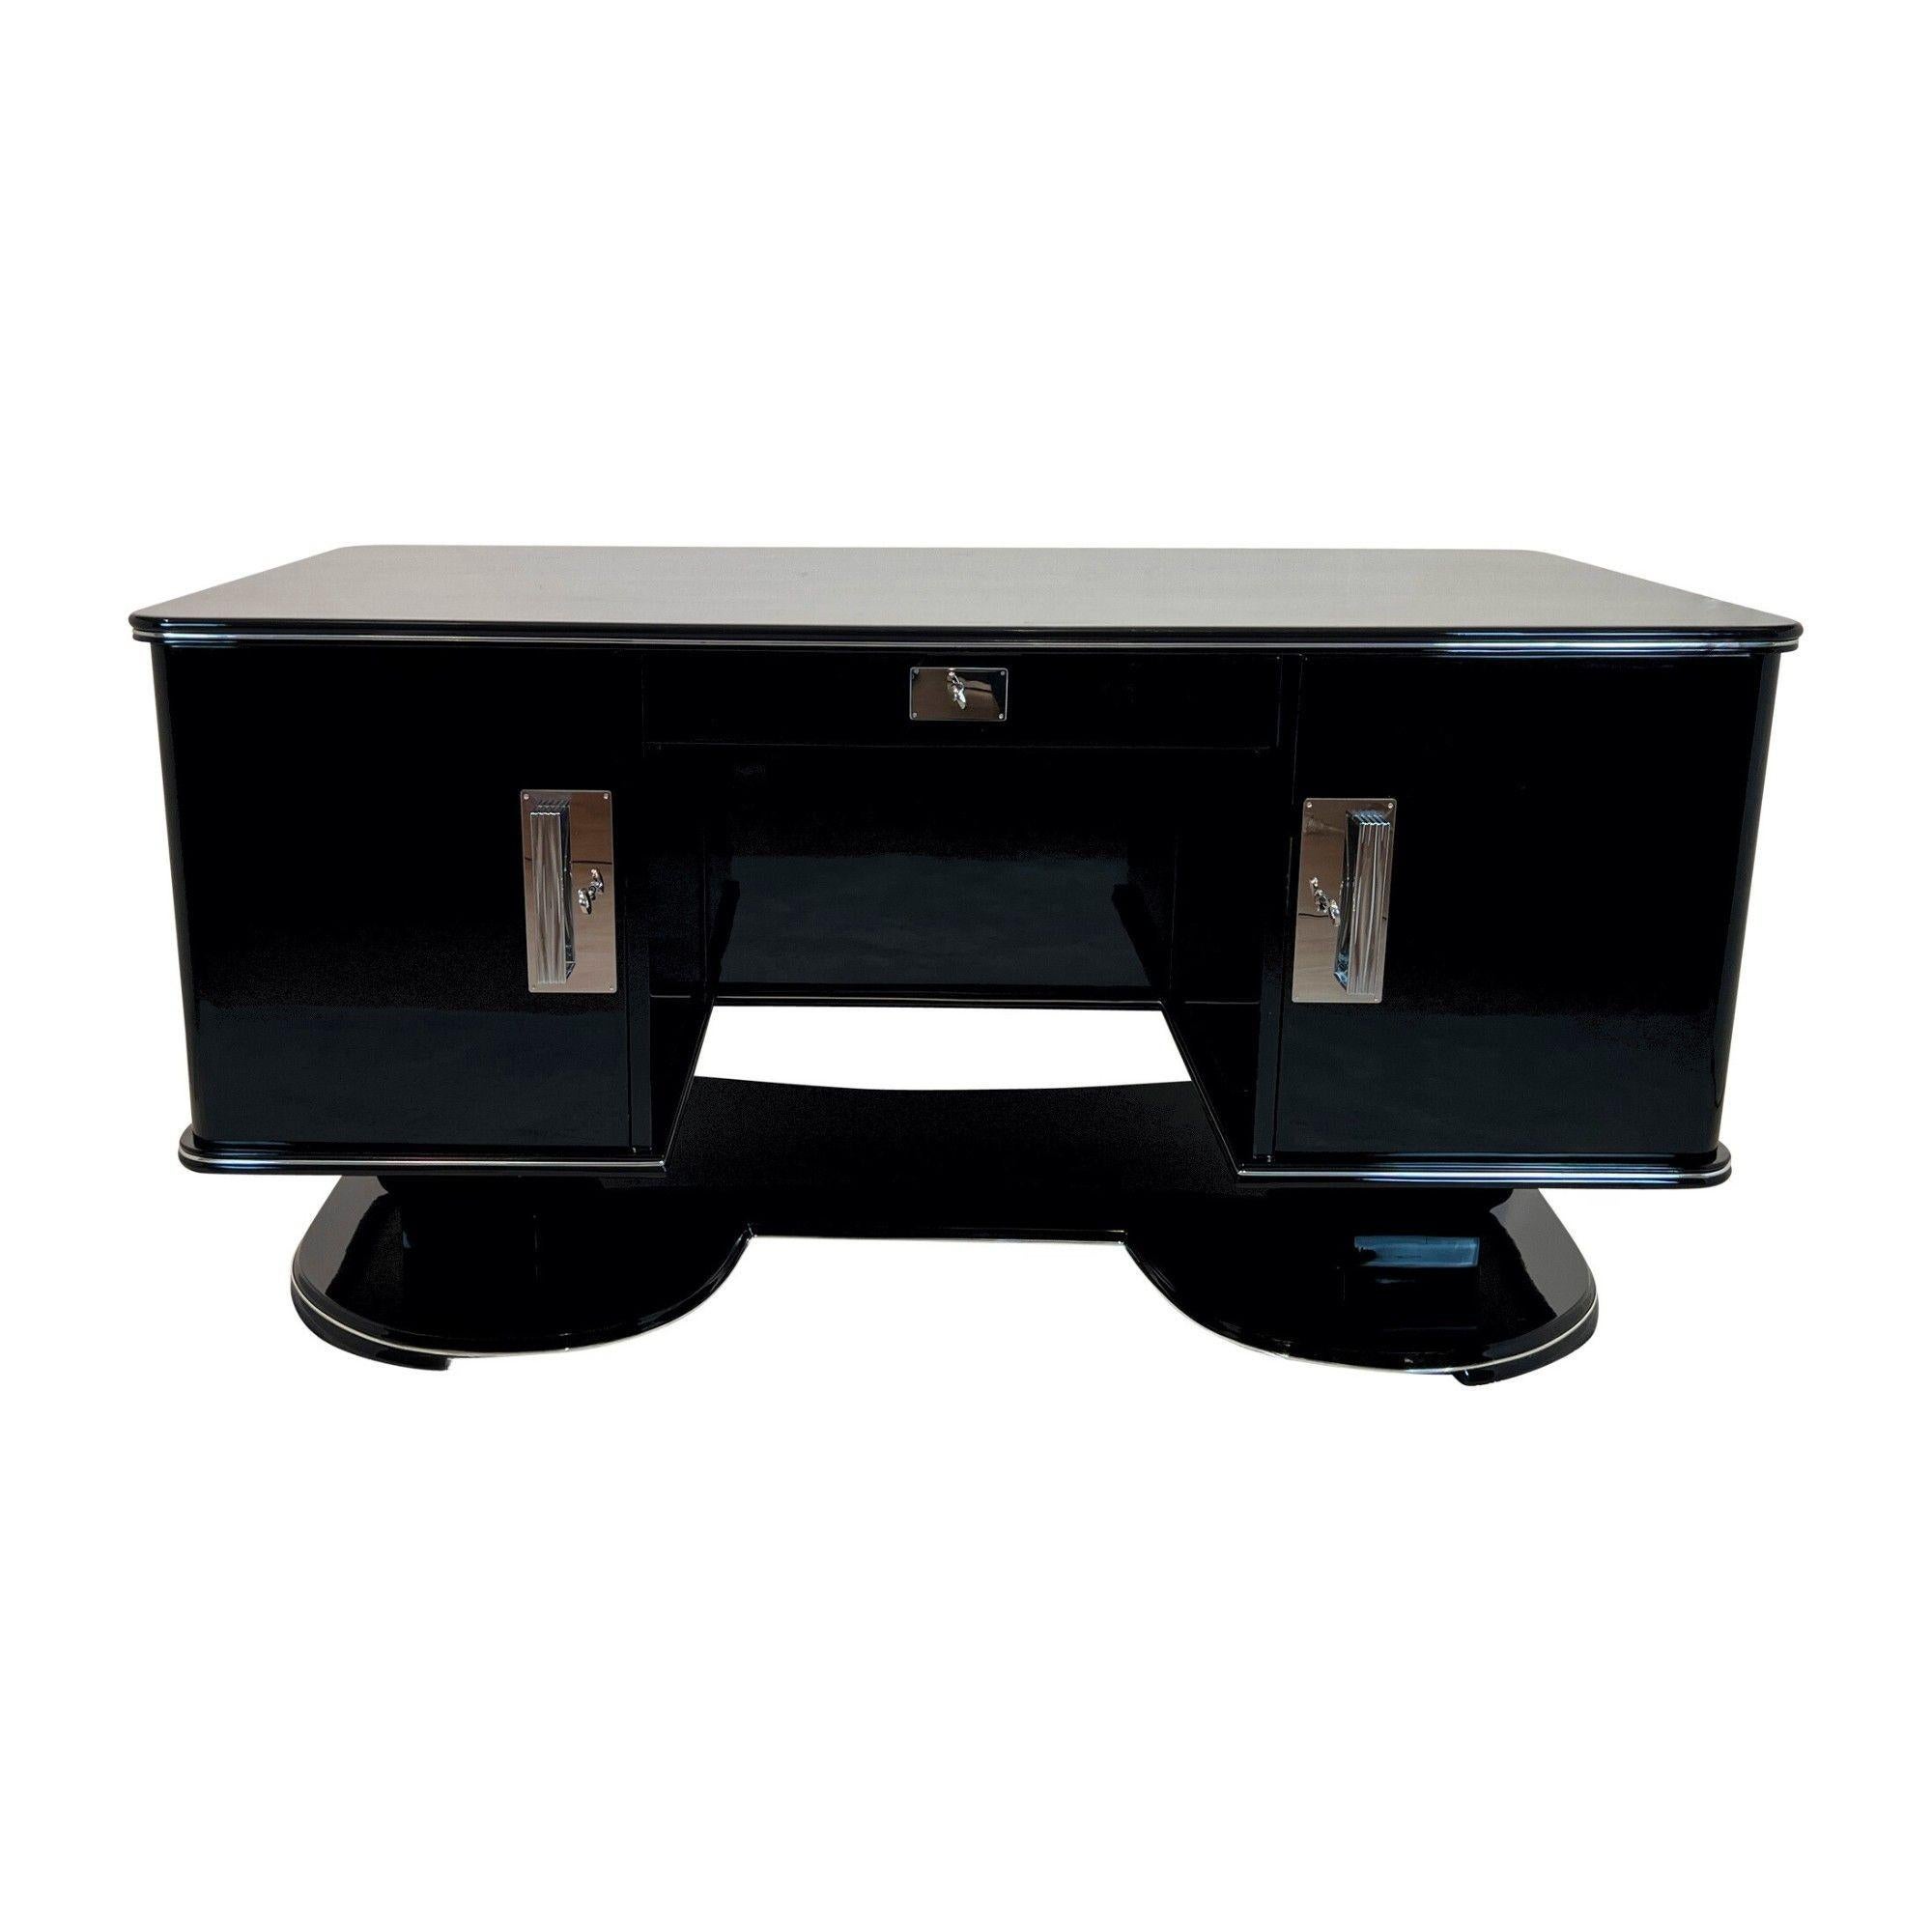 Large Art Deco desk in black lacquer with chrome details from France, 1950s.
High quality restoration with black high gloss polished piano lacquer on mahogany body. Standing on a beautiful large, curved floor base.
Chrome-plated handles and metal